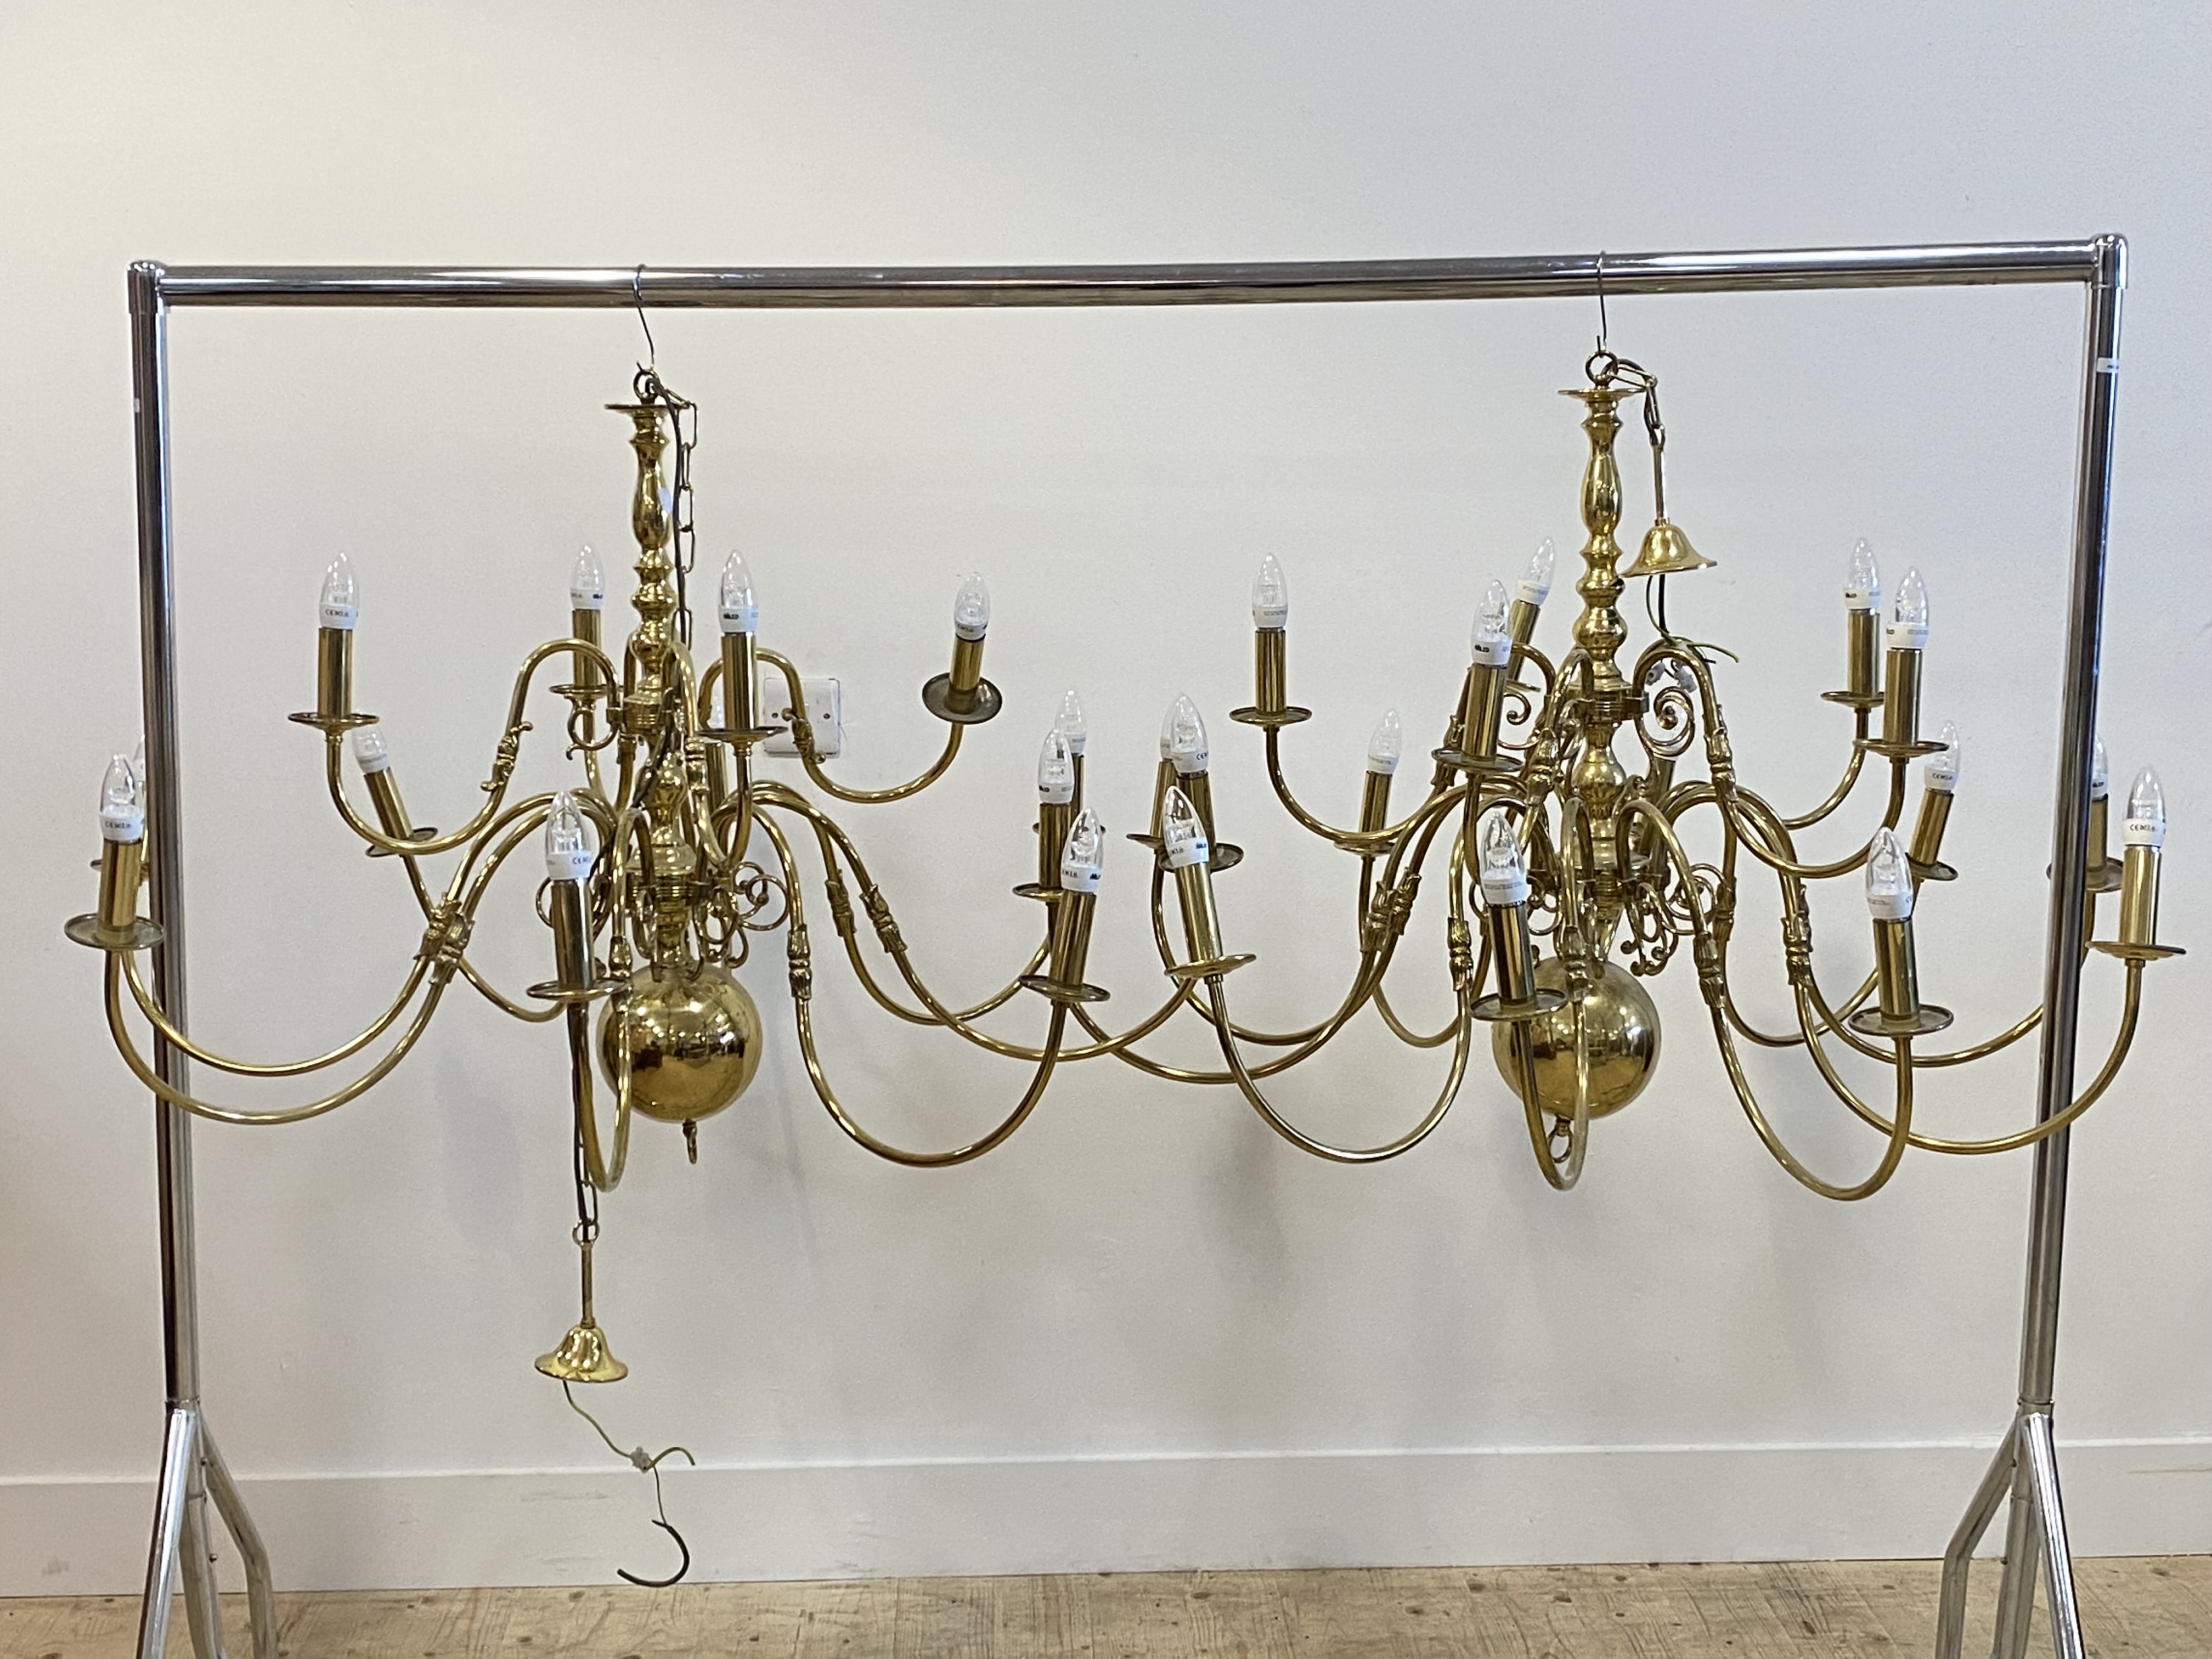 A pair of gilt lacquered brass Dutch style brass chandeliers, each with central column issuing 15